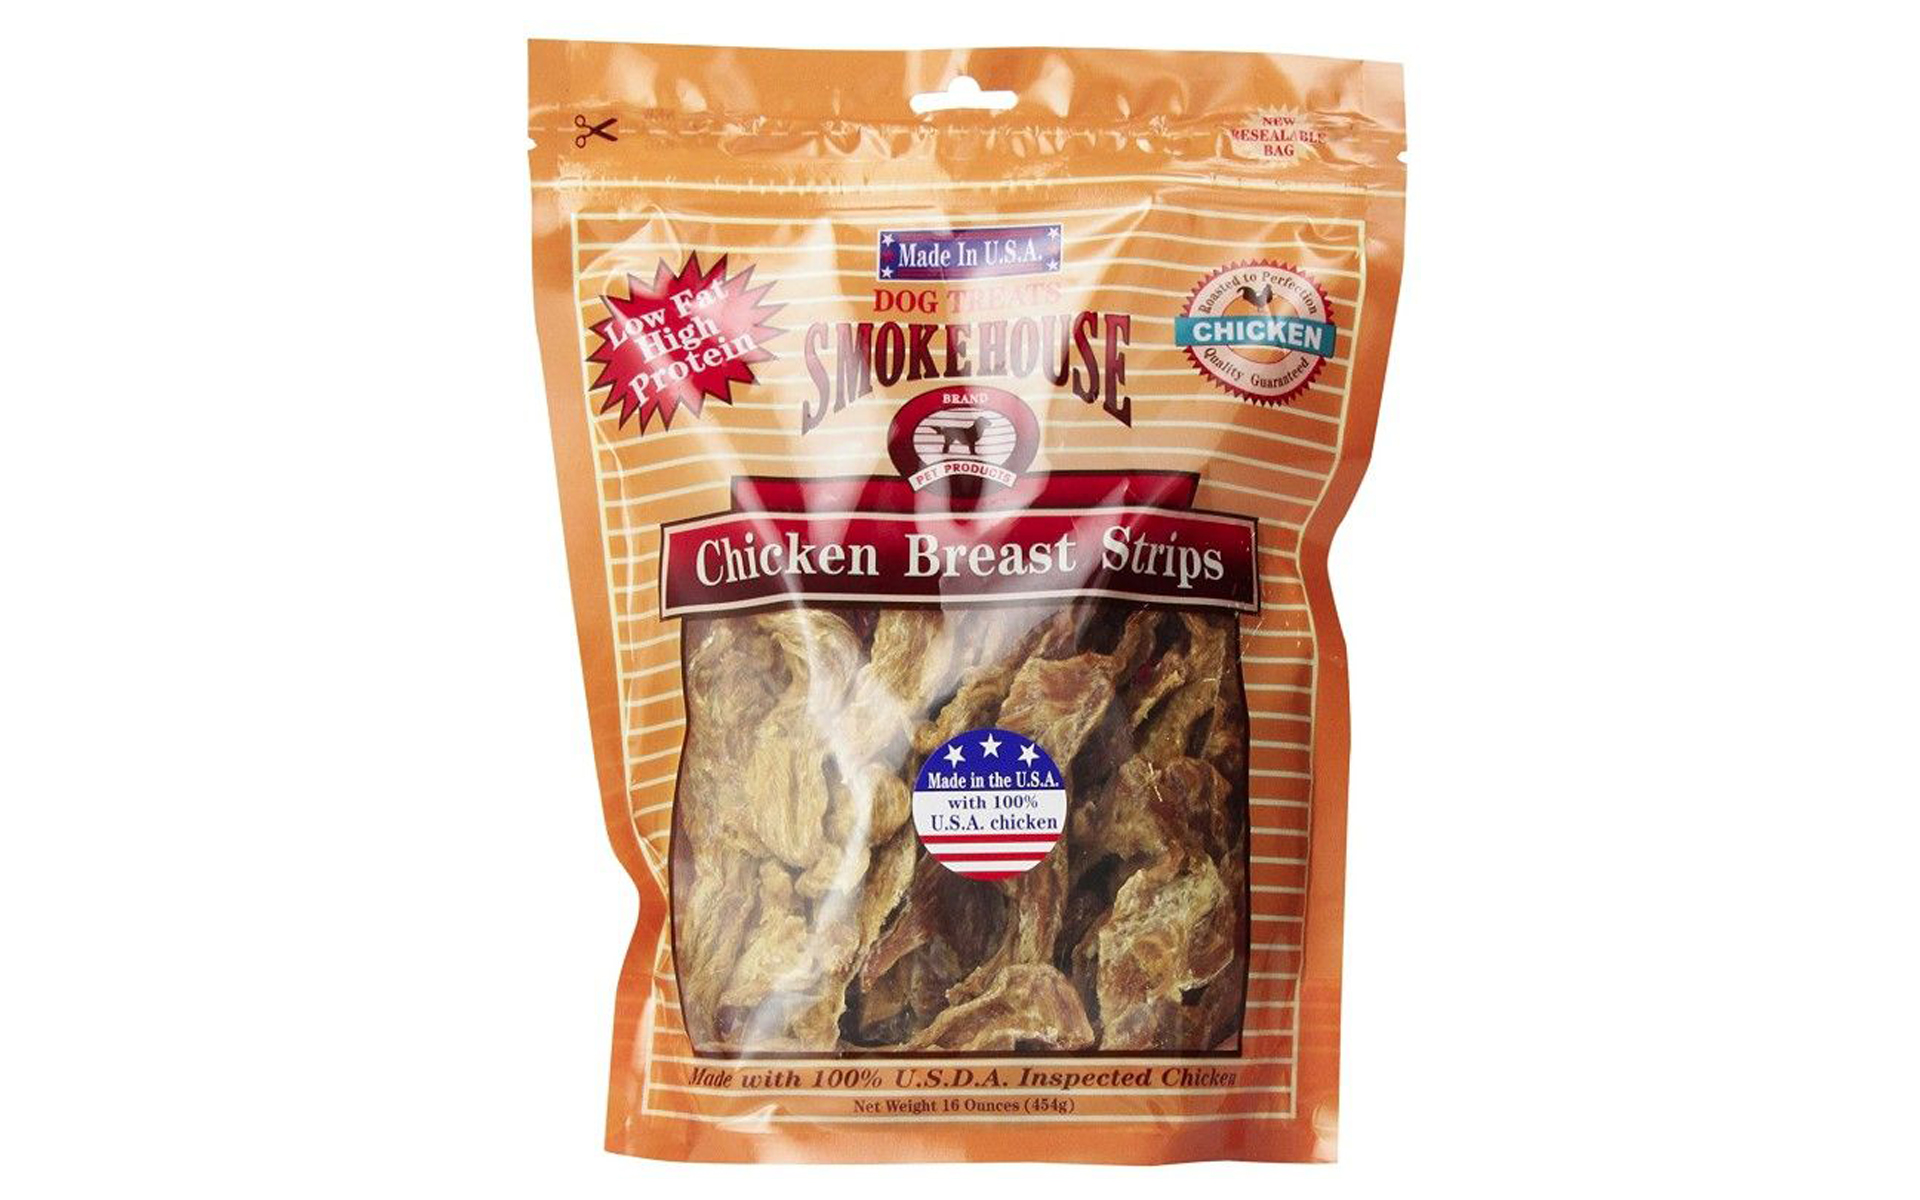 Smokehouse Chicken Breast Strips Natural Dog Treat